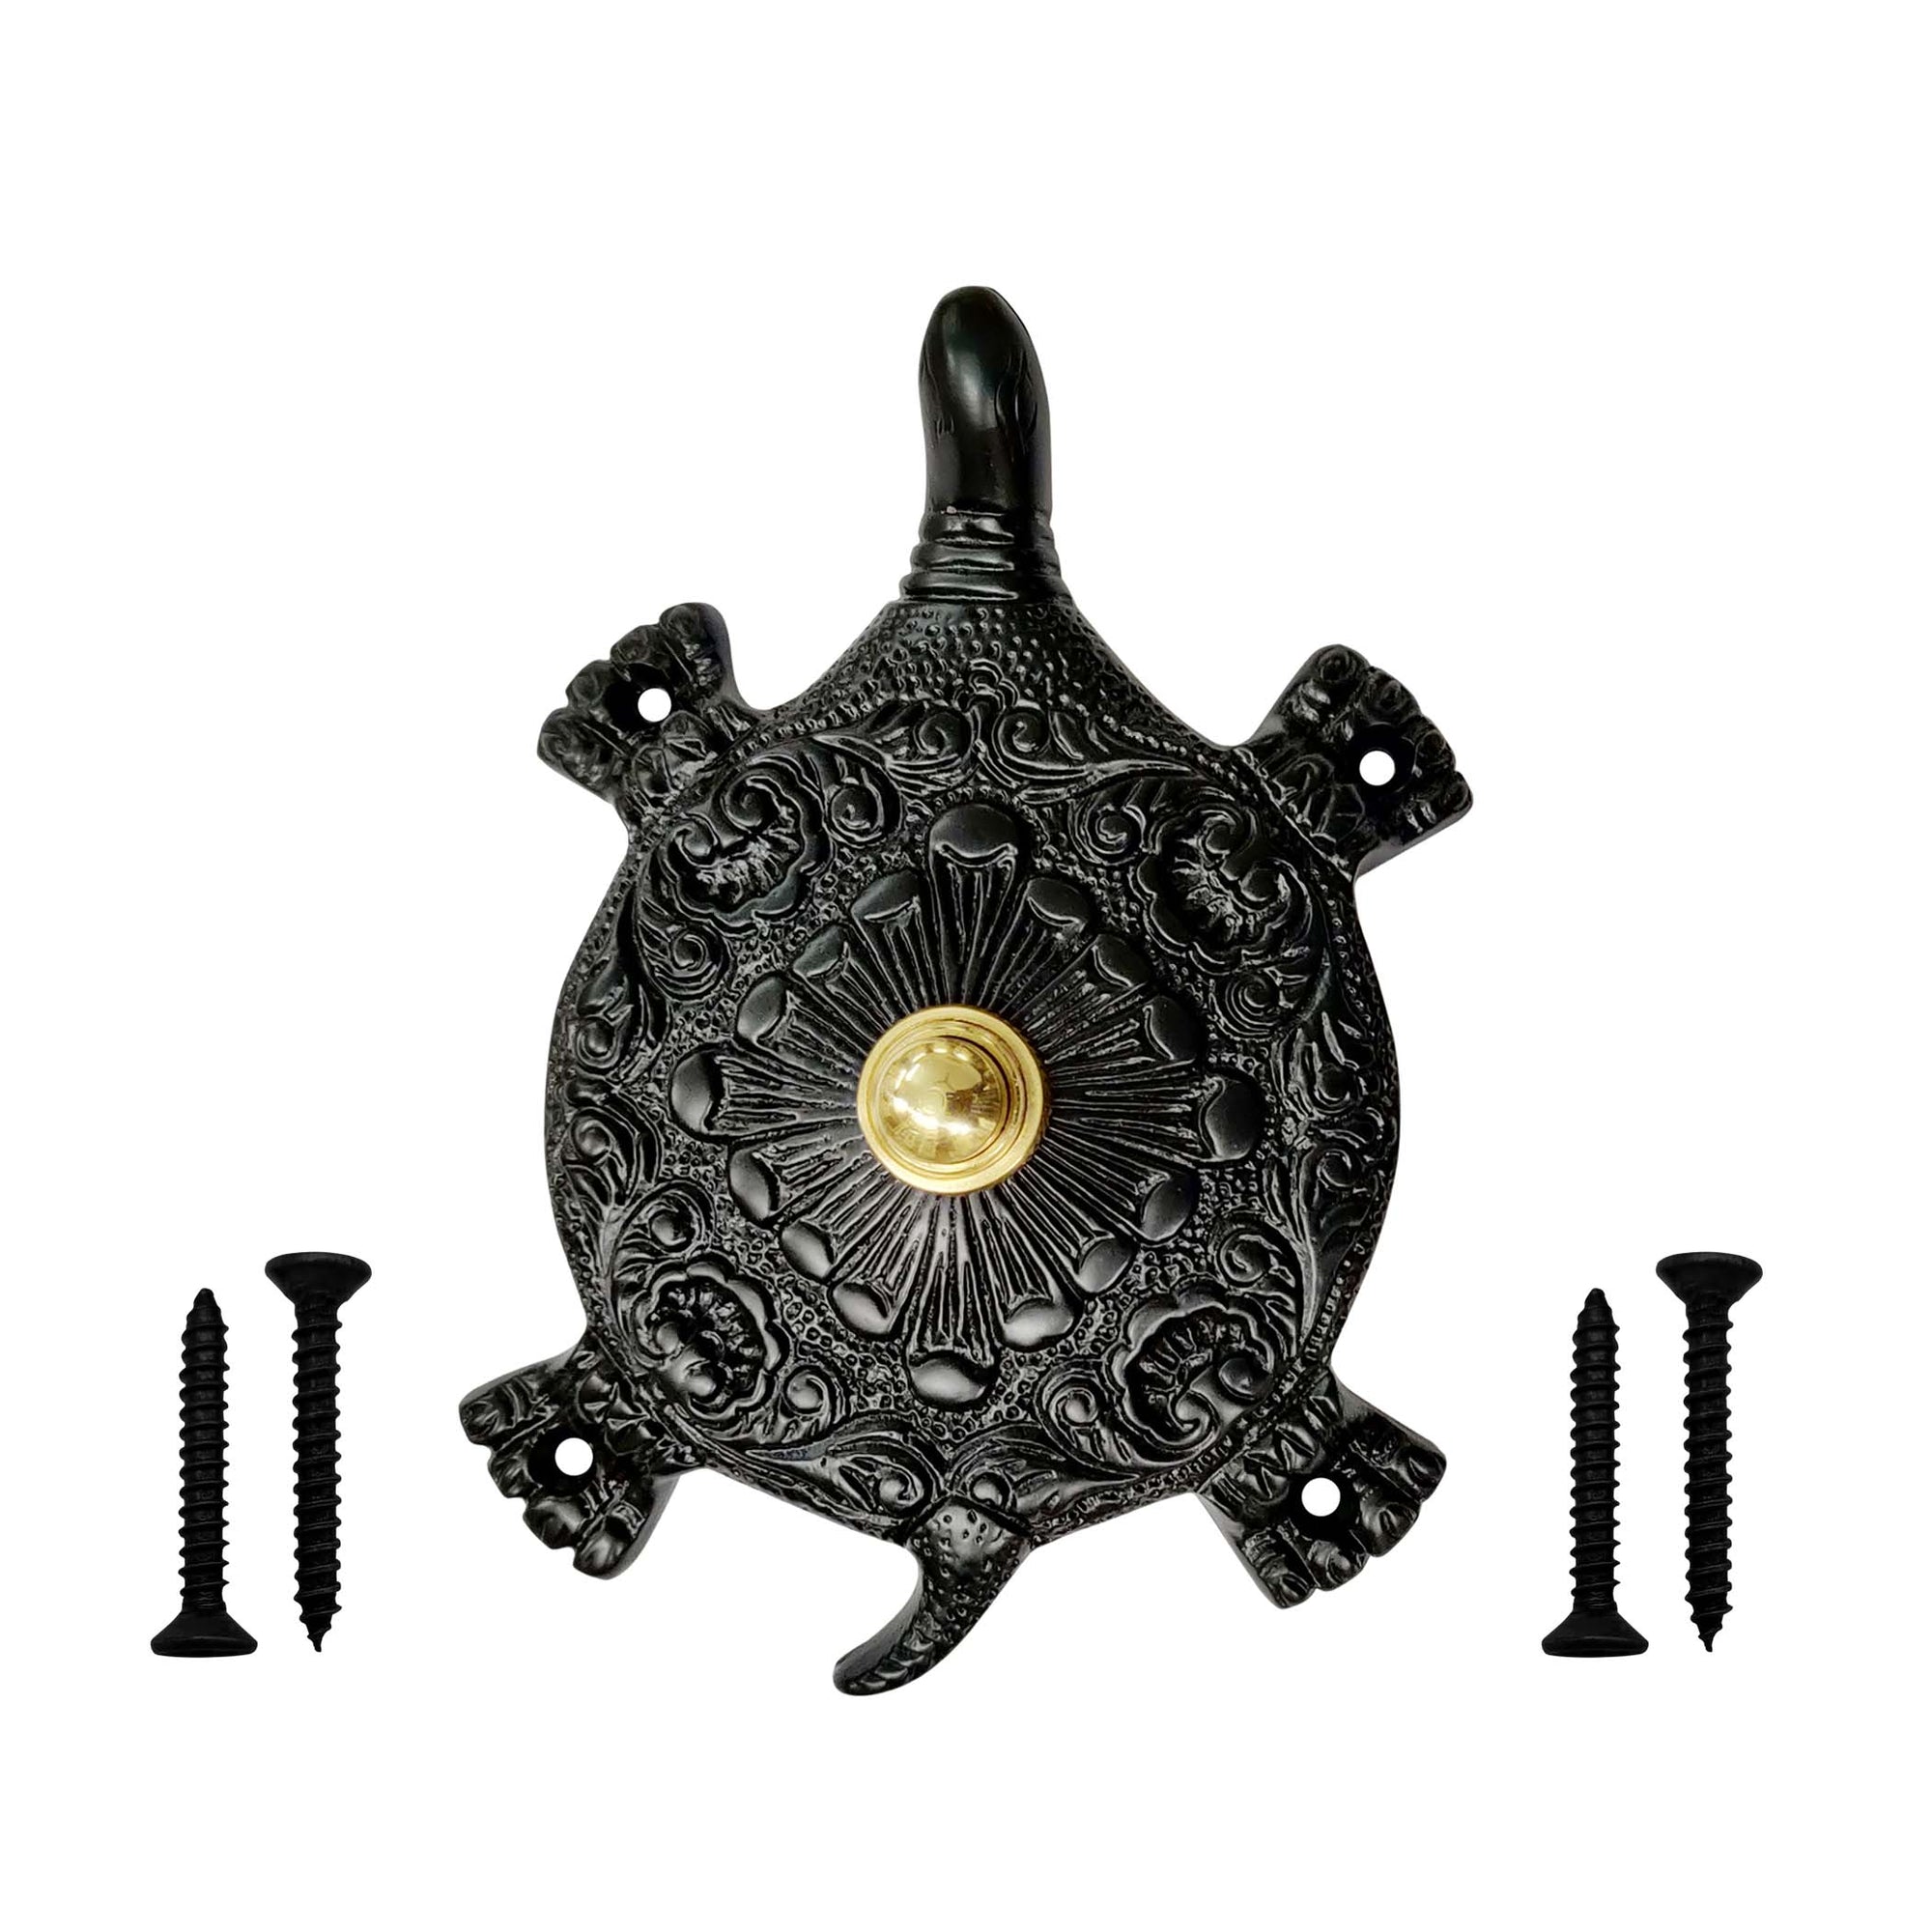 Decorative Doorbell Button – Finest Quality Bell Push Button – Easy to Install Calling Bell Button – Antique Black